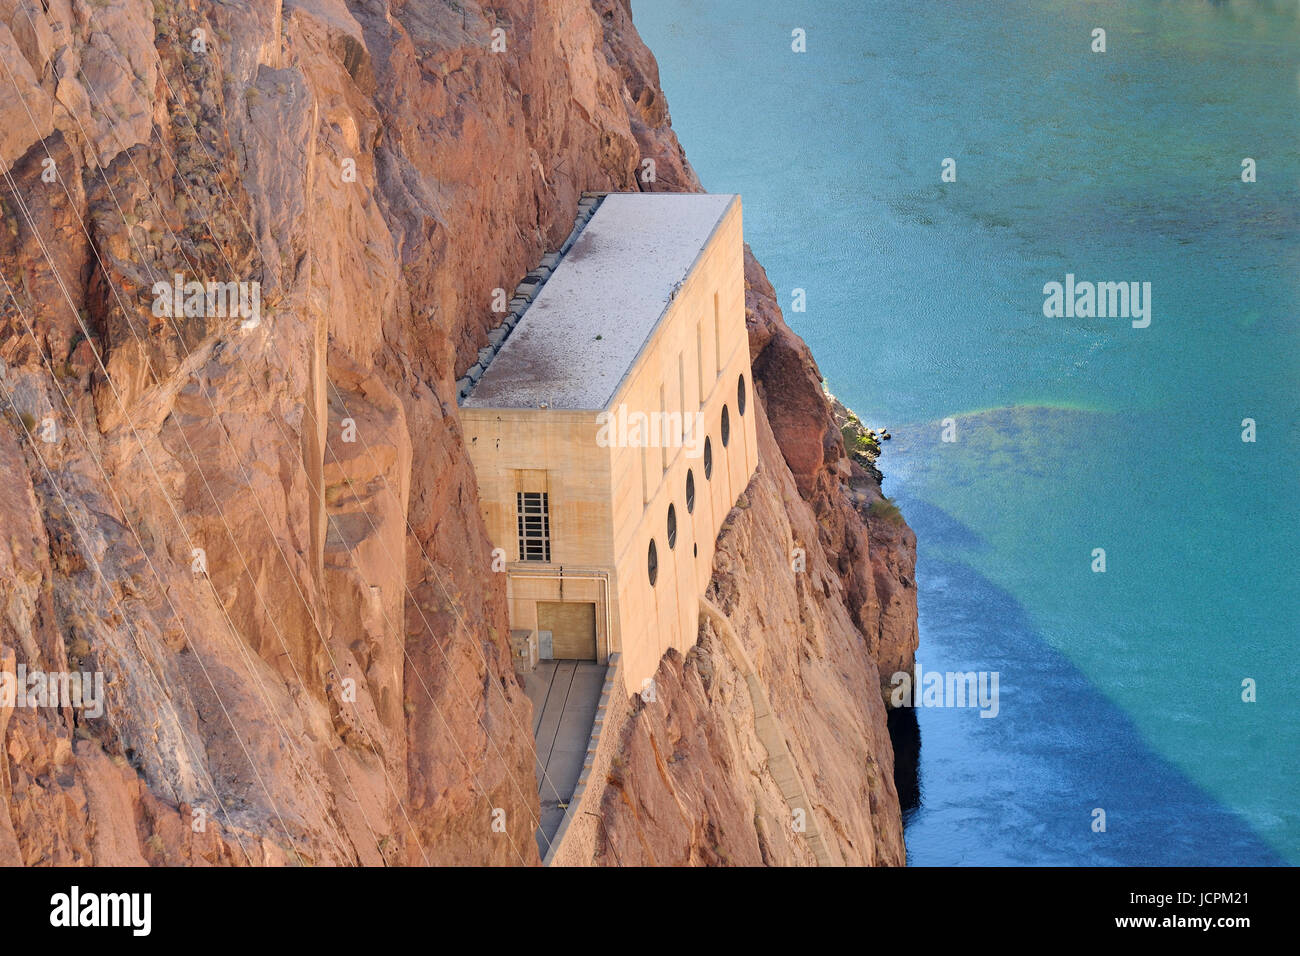 Small building down to the hoover dam Stock Photo